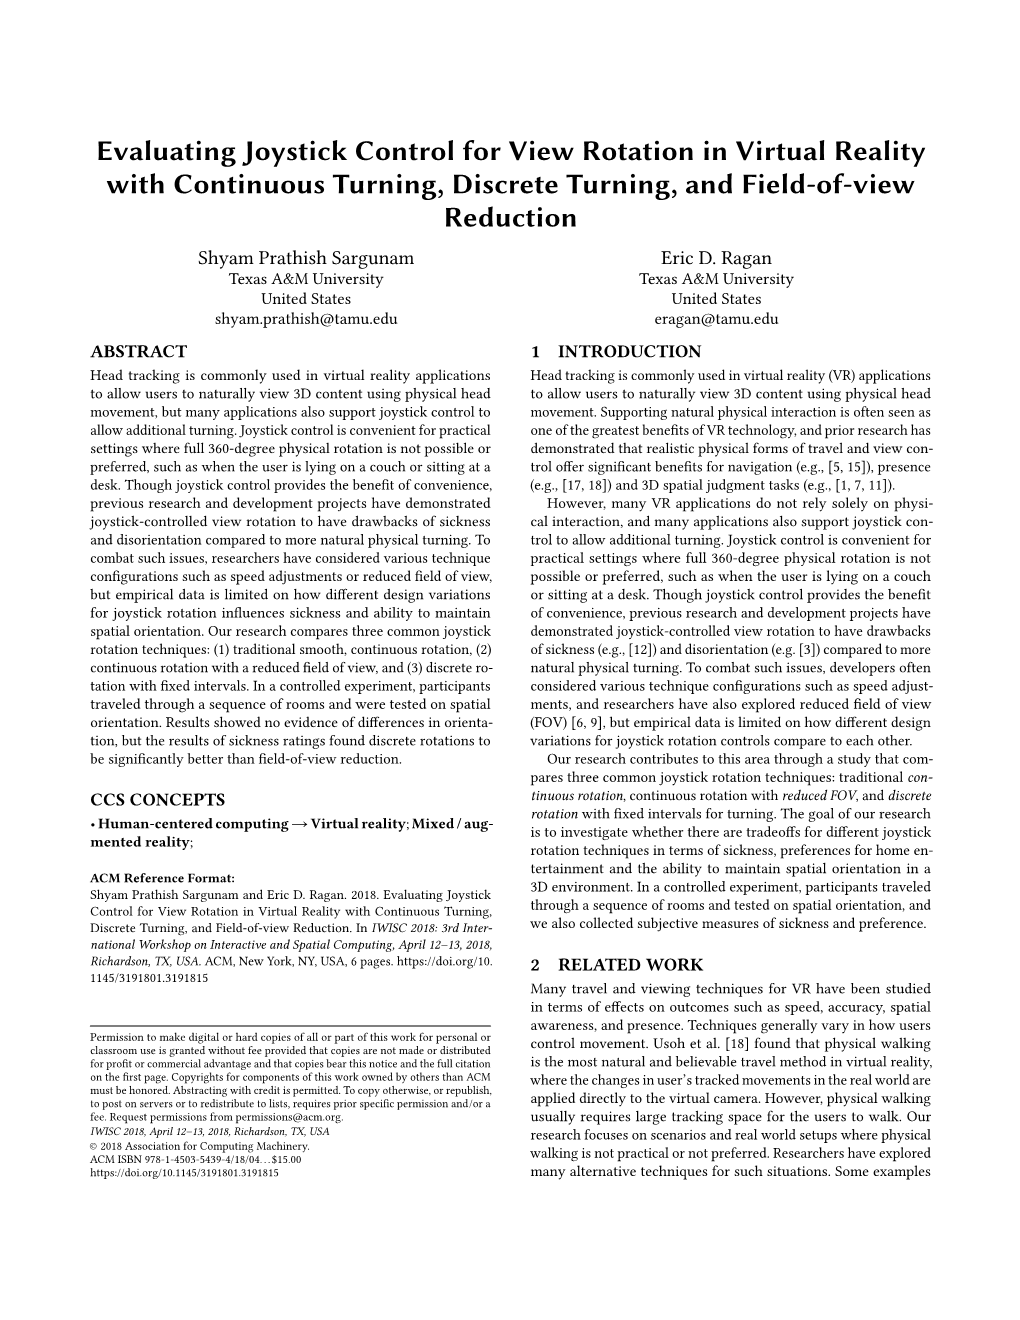 Evaluating Joystick Control for View Rotation in Virtual Reality with Continuous Turning, Discrete Turning, and Field-Of-View Reduction Shyam Prathish Sargunam Eric D